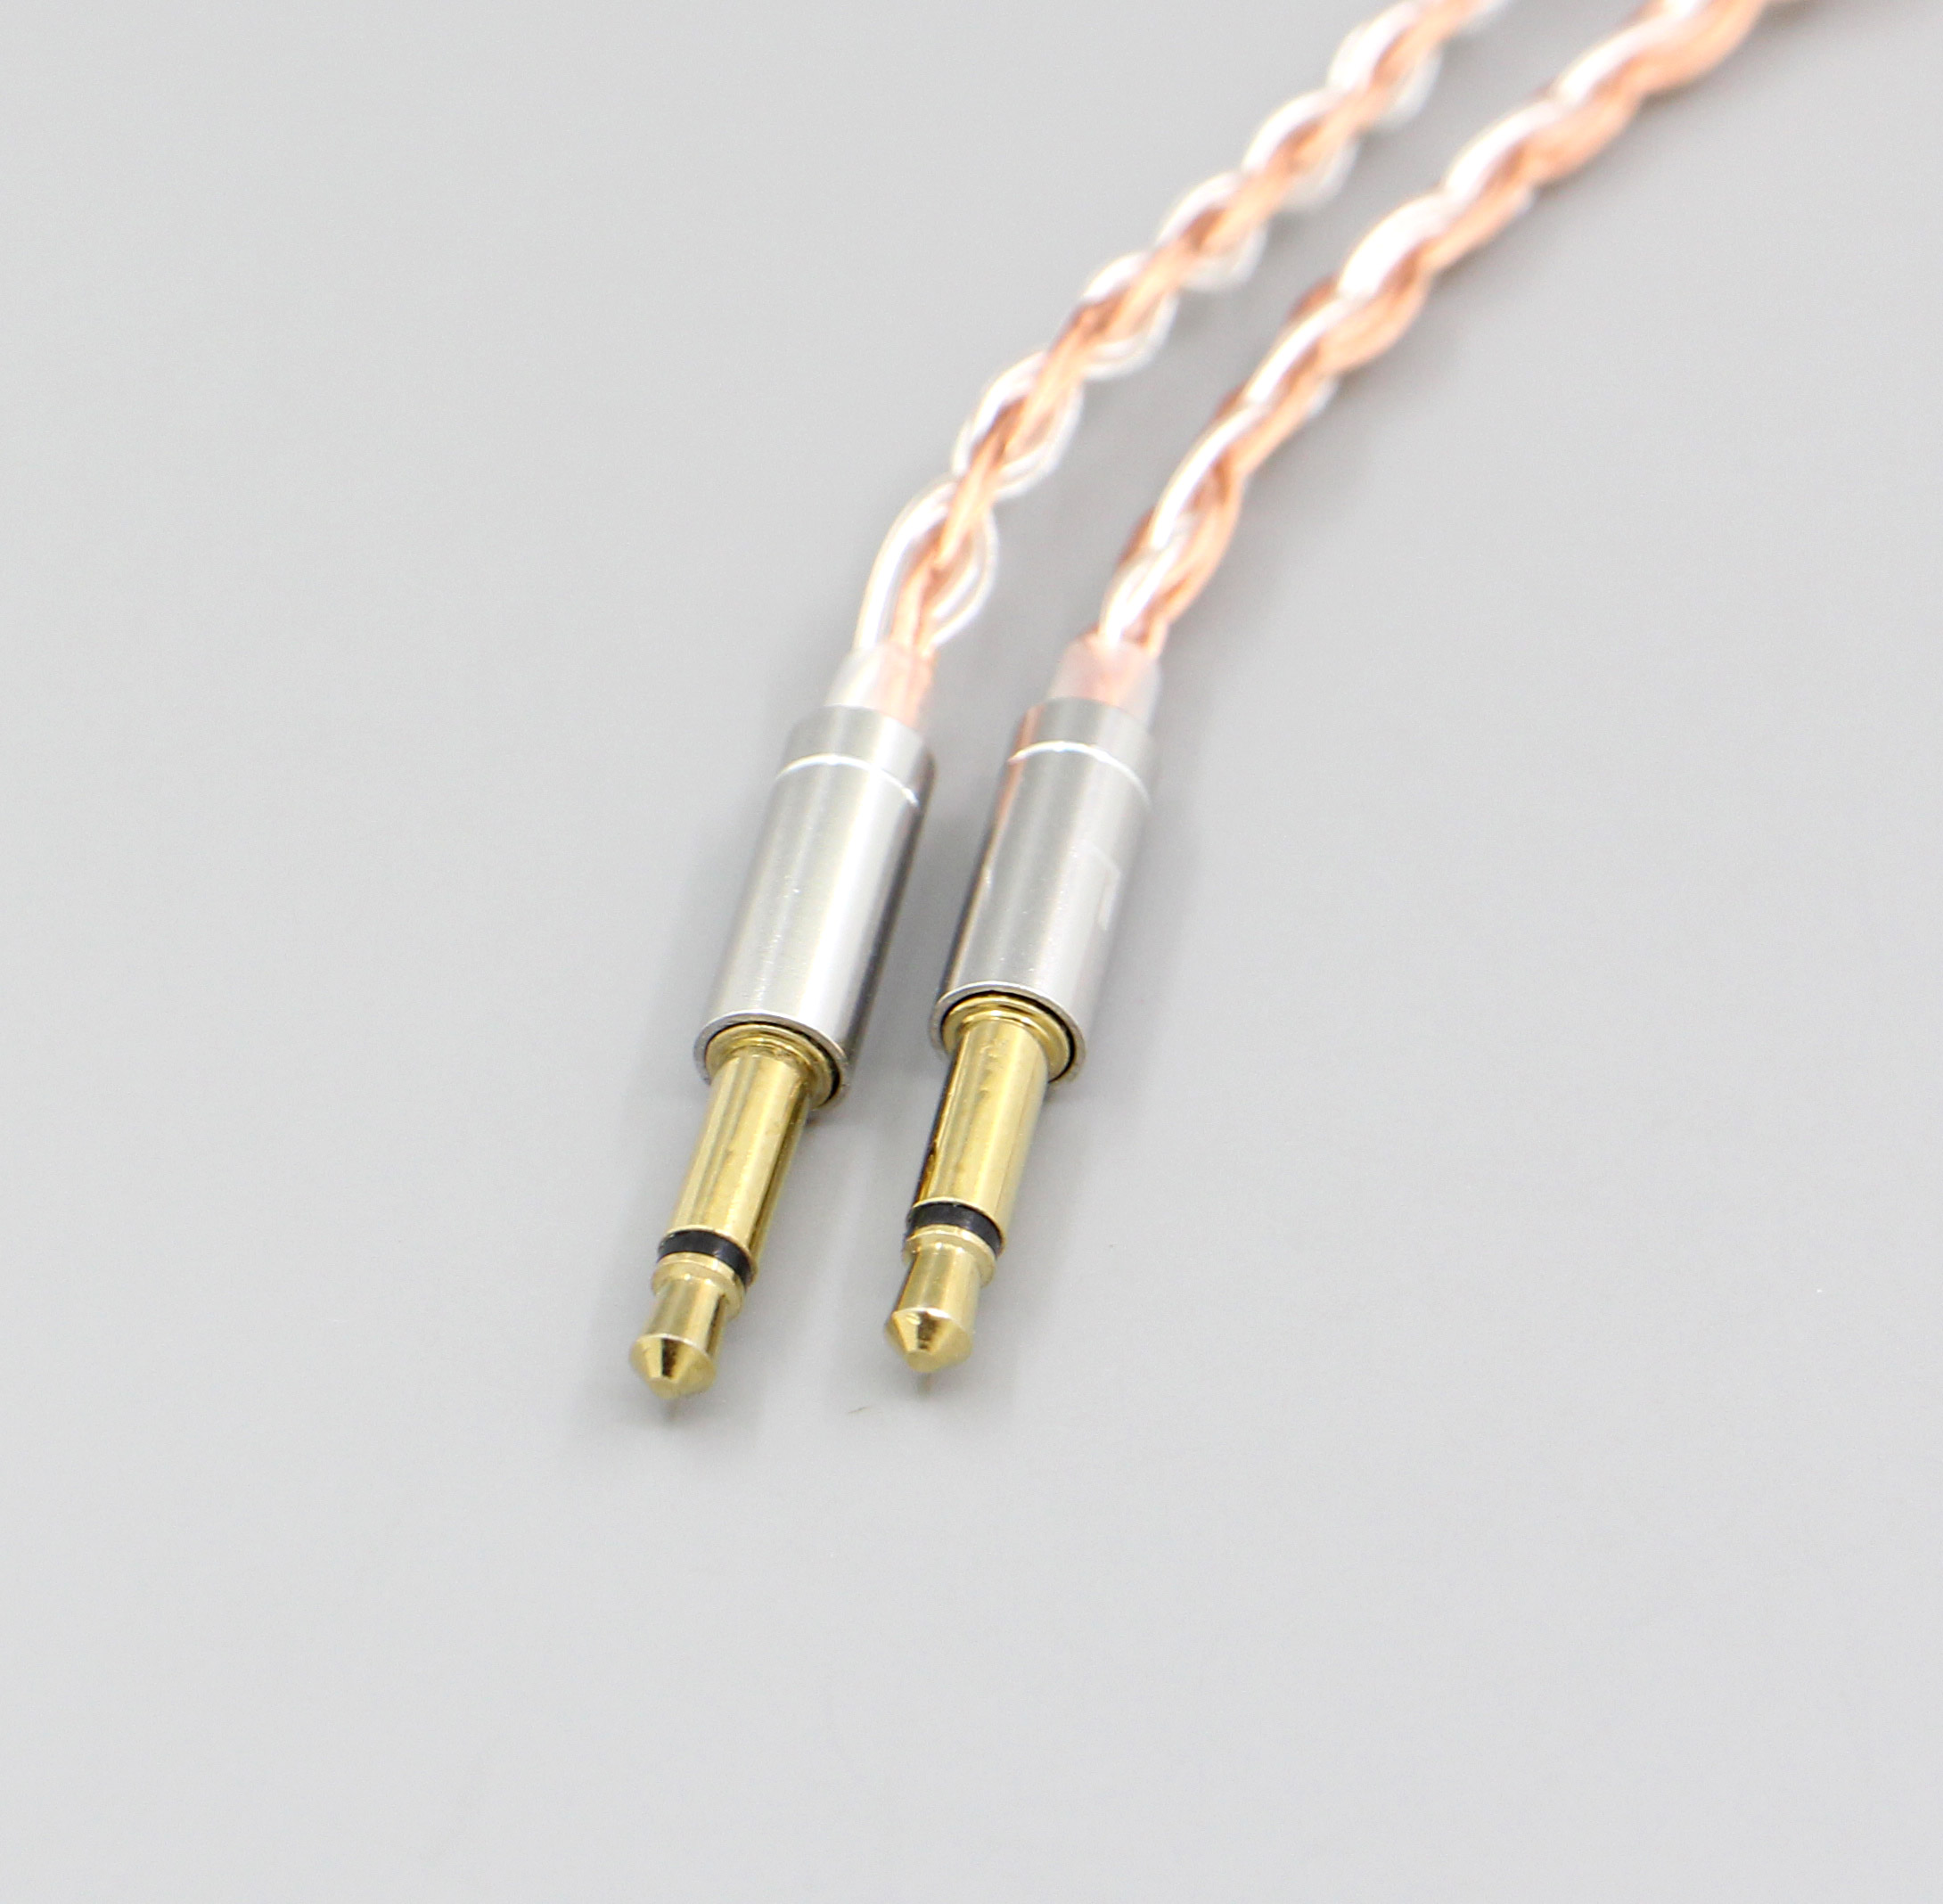 We have 3.5mm , 3.5mm balanced,2.5mm balanced,4.4mm balanced ,and XLR 4 pin plug for your selection, Please leave us message for the type you want when you order. Or else 3.5mm plug version will be shipped out.     Tips: 3.5mm 4 pole Balanced Plug (Bal) cable work on Hifiman Series Player,Qulcos qa361 Player , COWON PLENUE S Player and other players which have related ports.  MobilePhone Iphone or normal player can not work (One side will not have sound if you use the 3.5mm balanced cable on them).